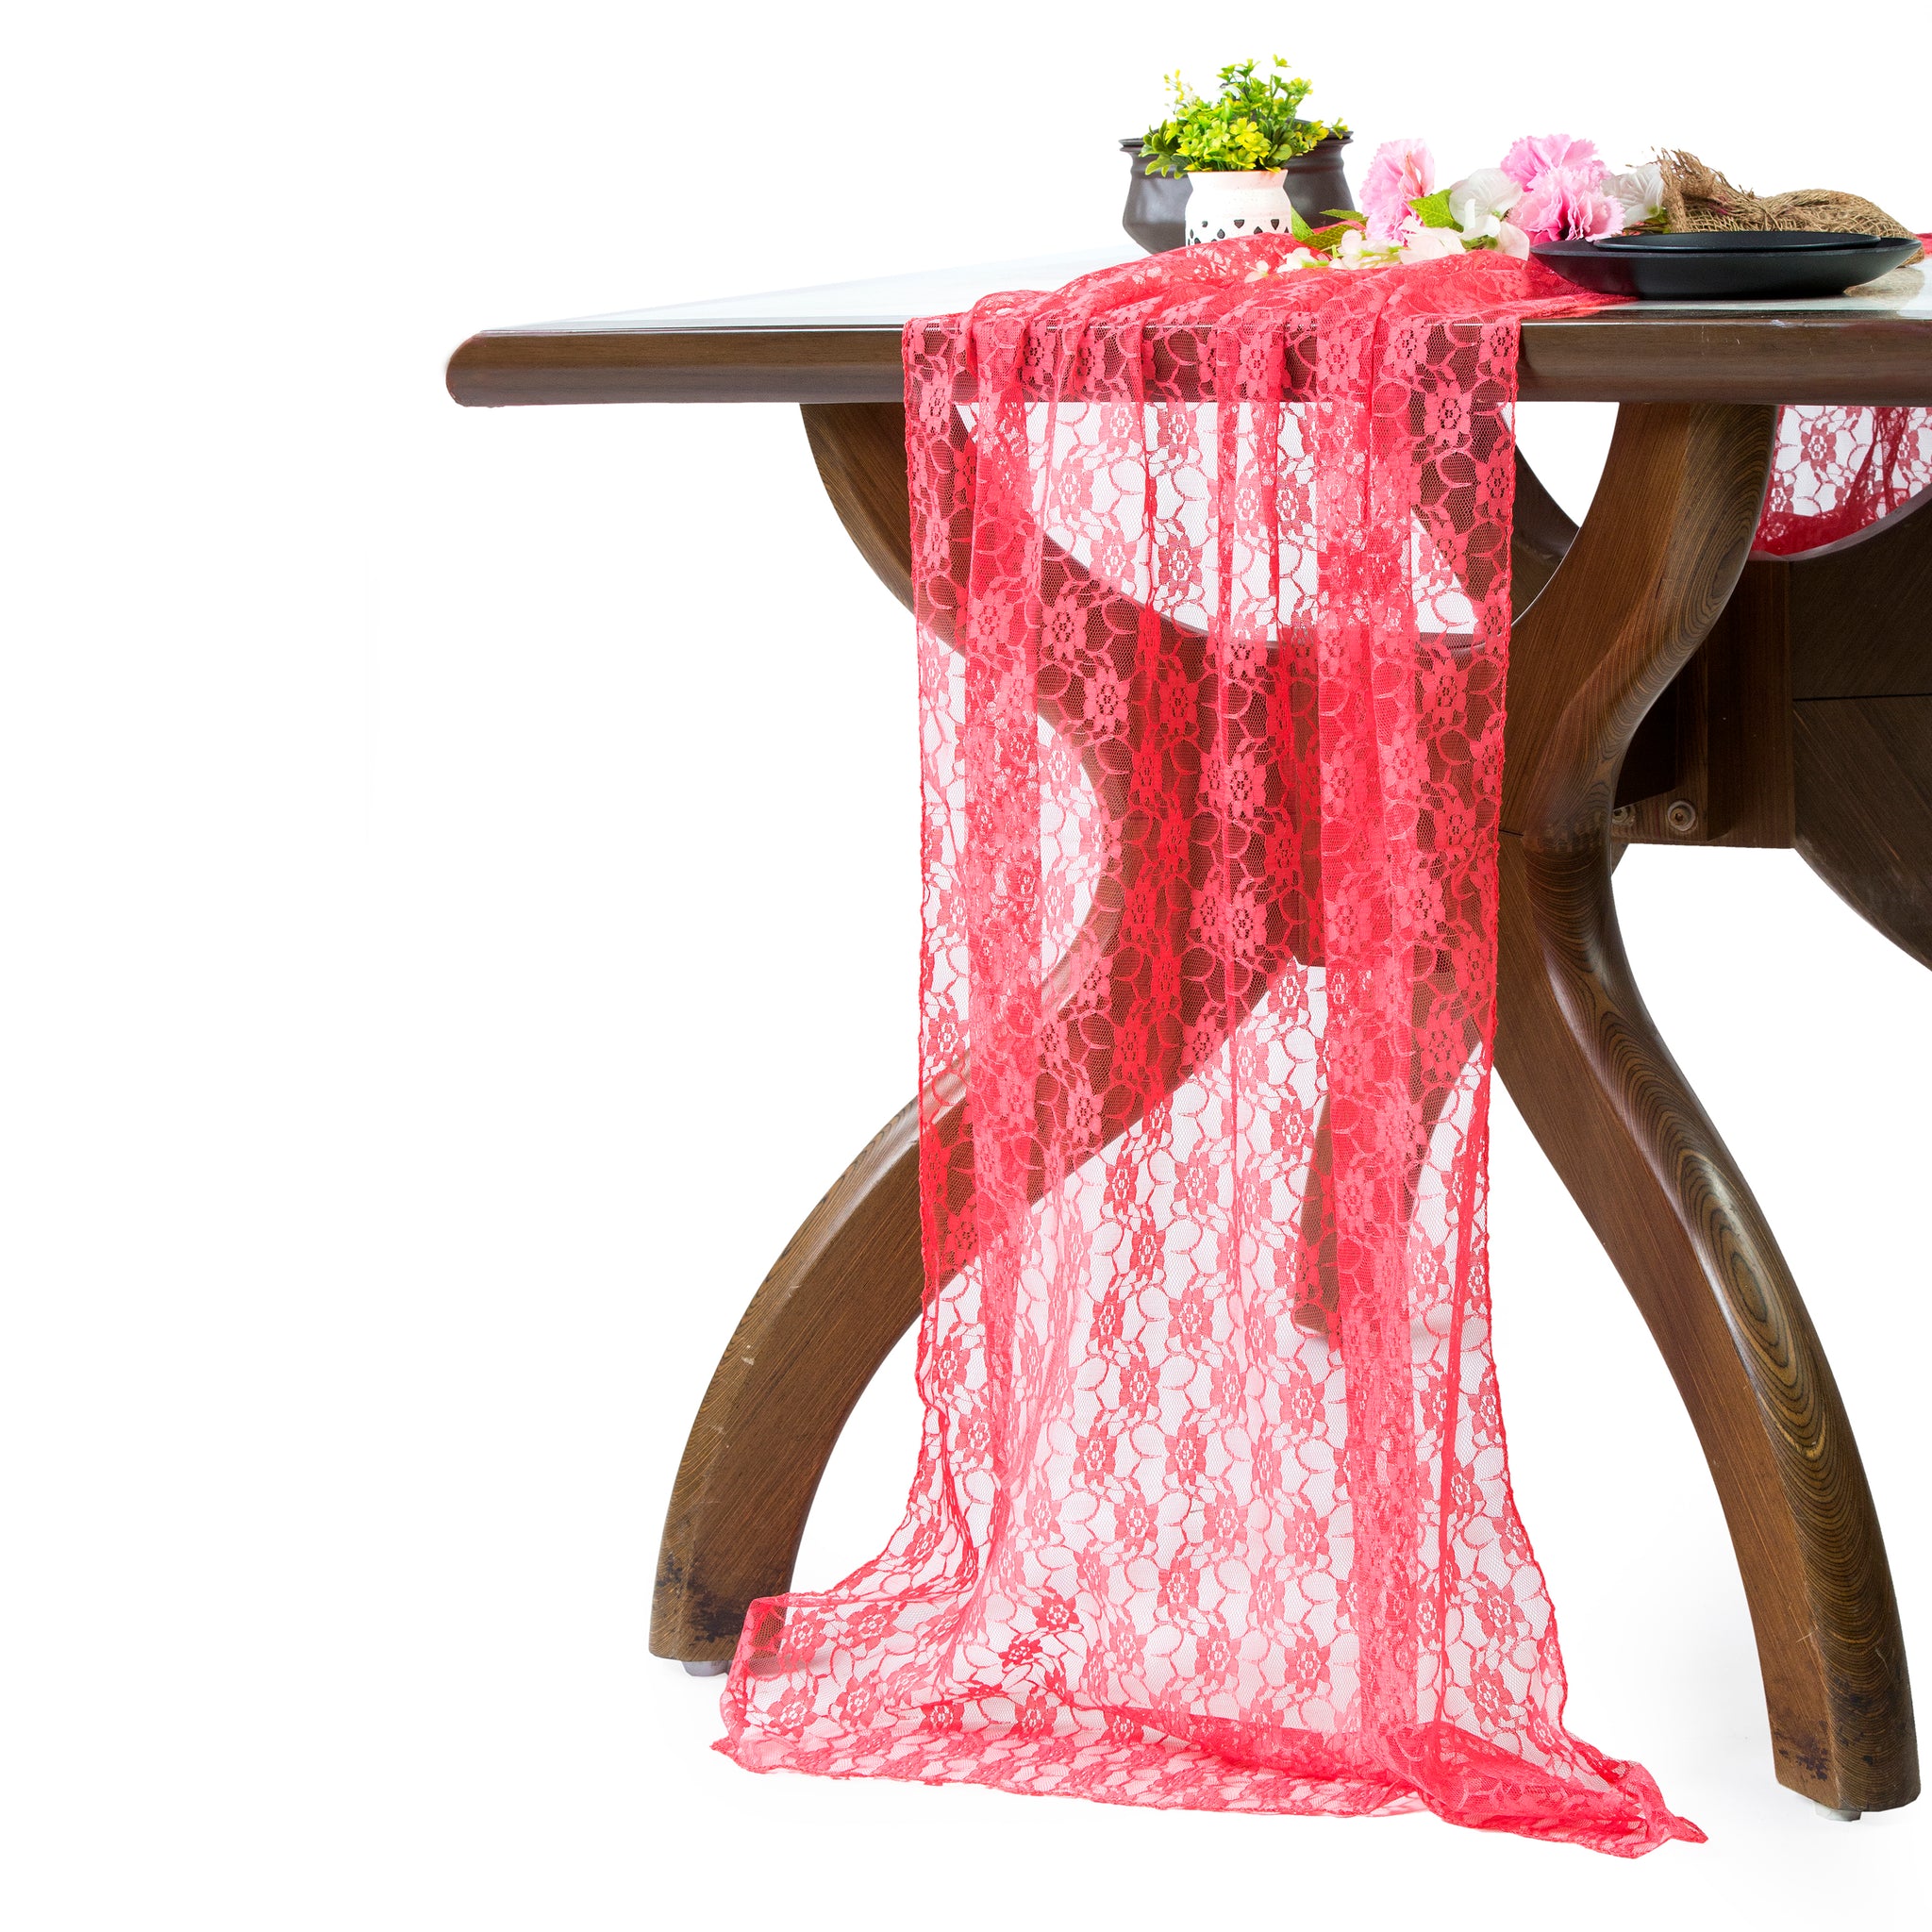 Lace Table Runners -10FT Long